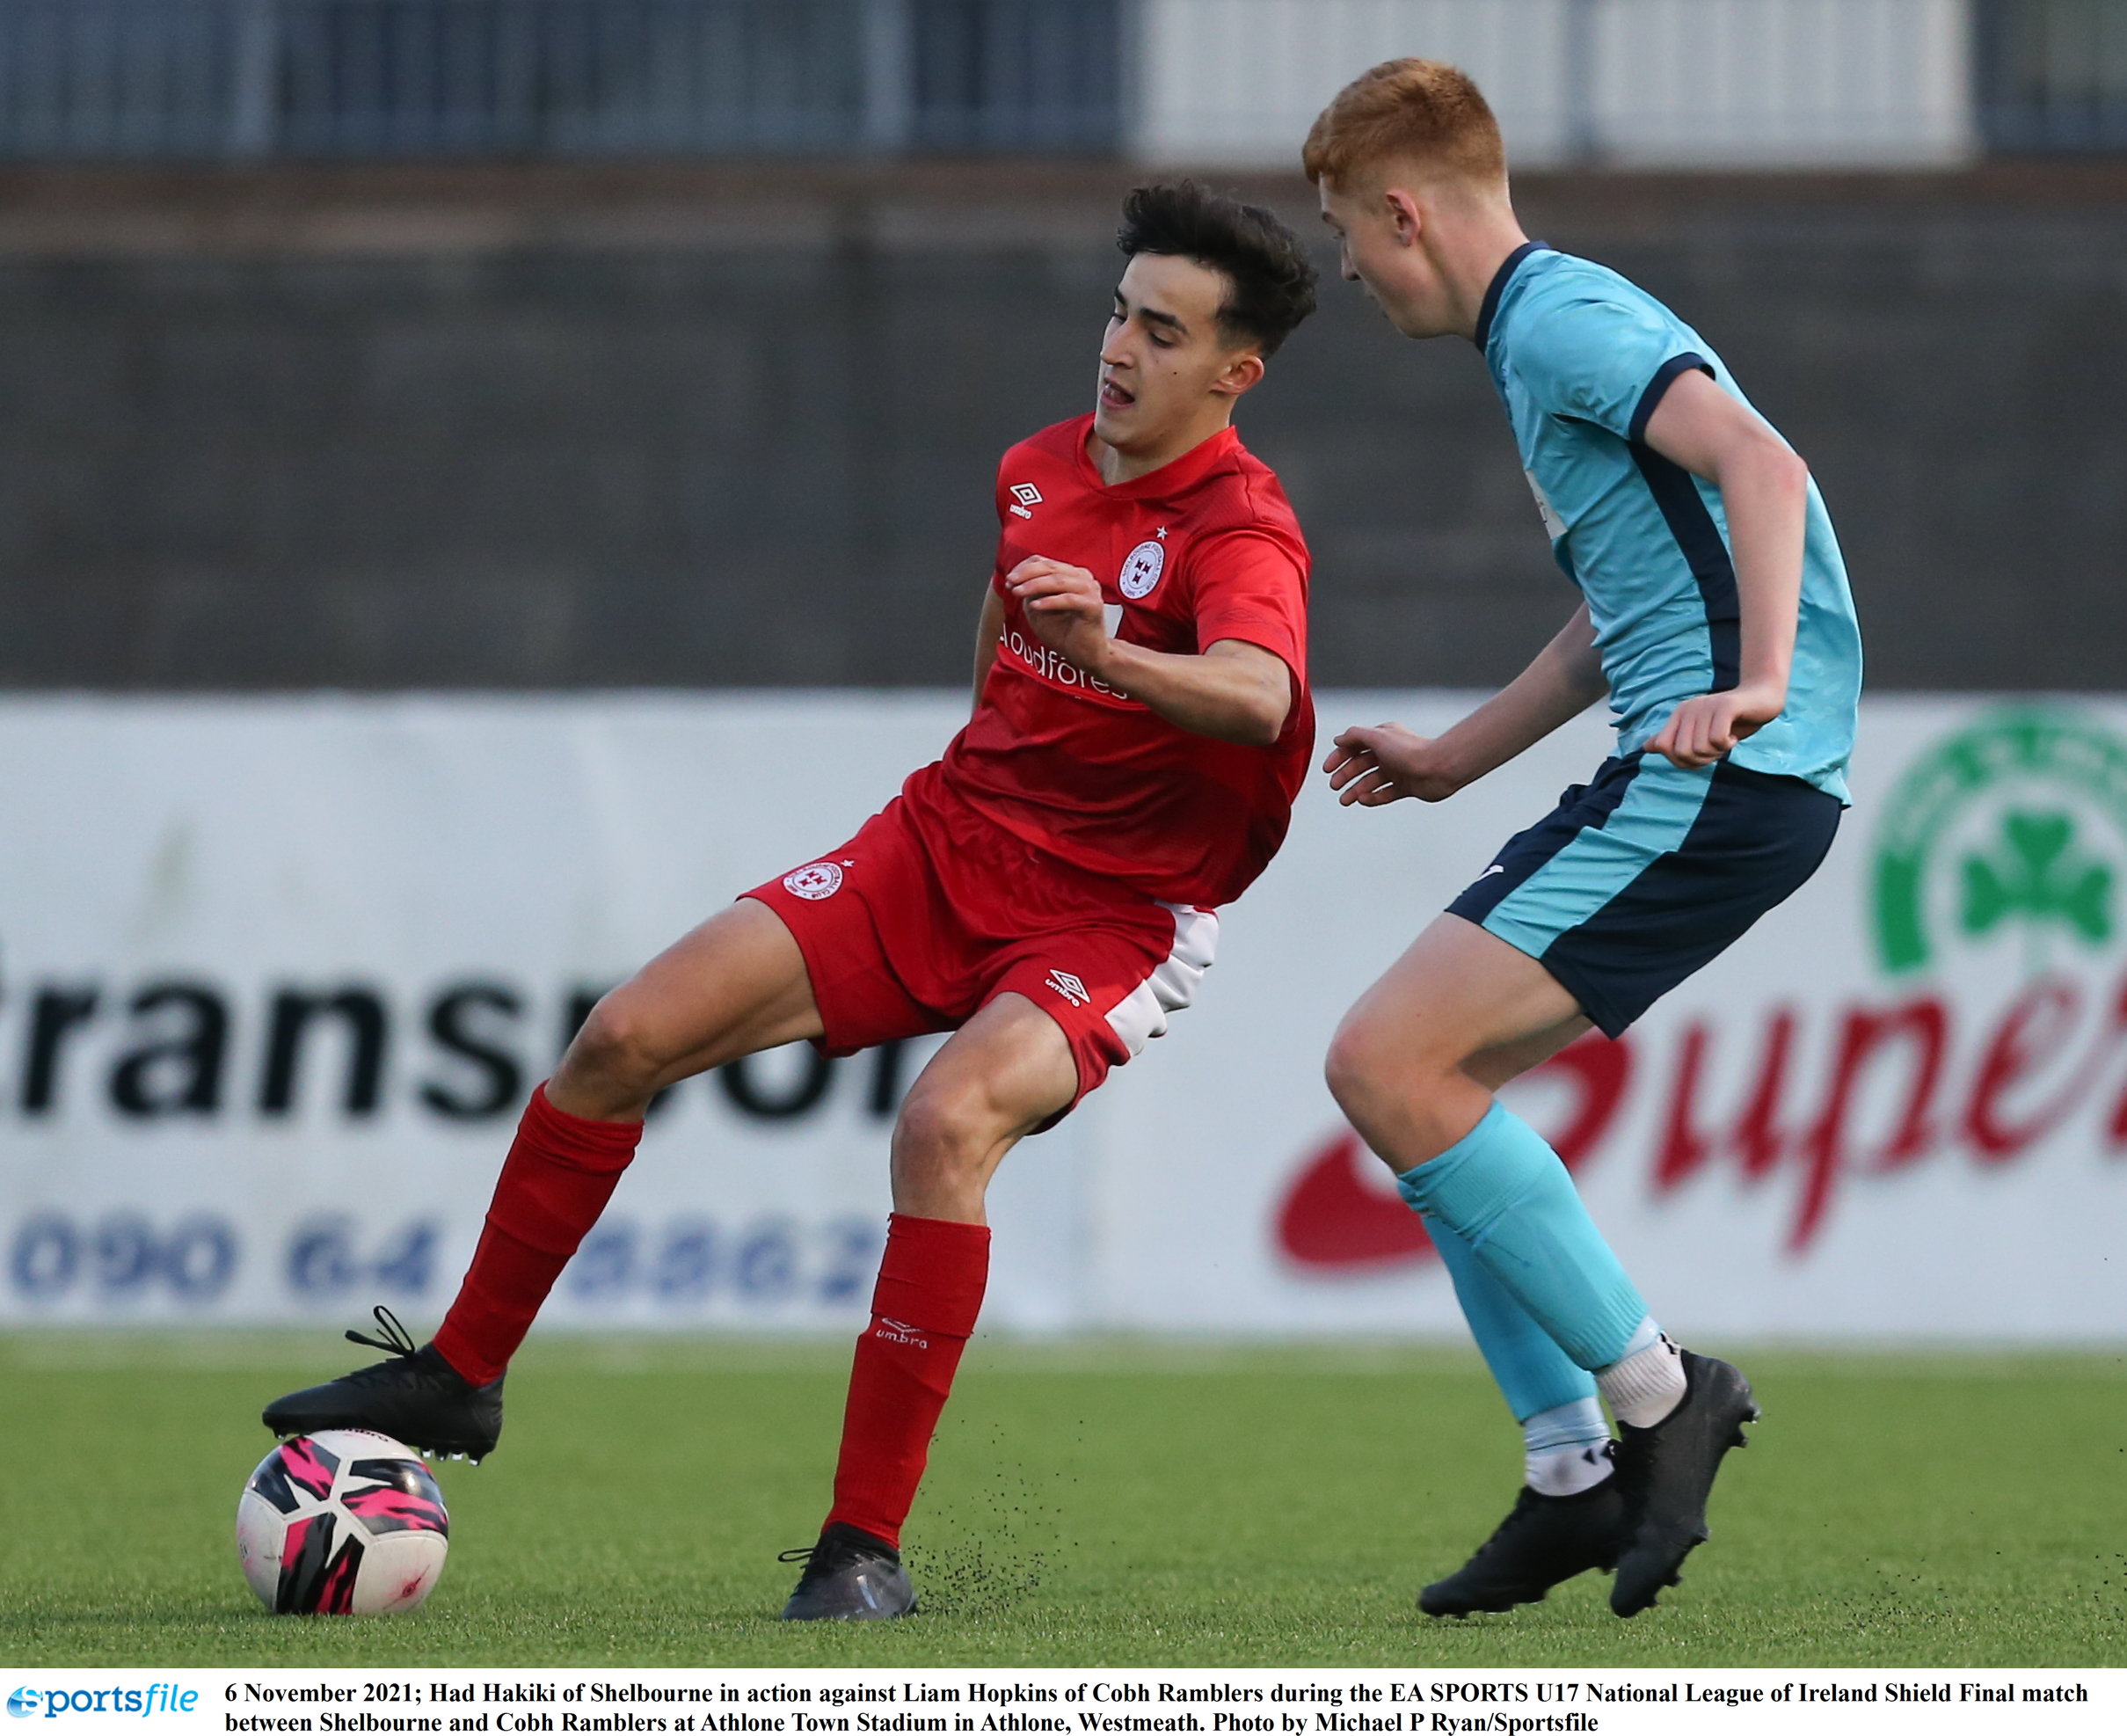 Shelbourne signs Jad Hakiki to first professional contract